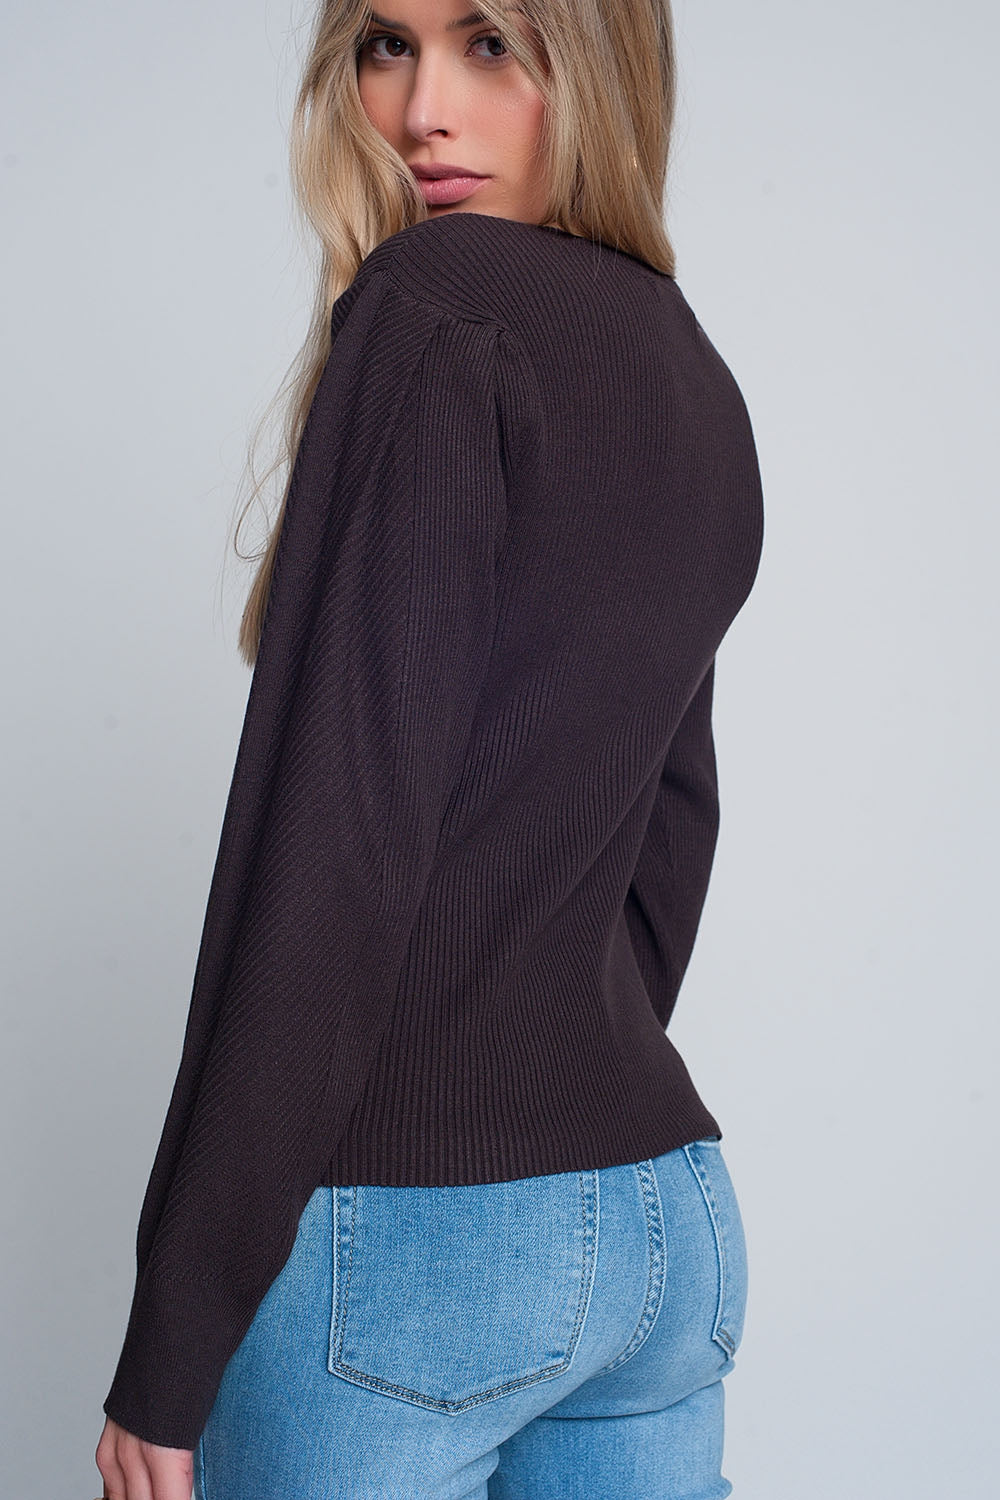 Brown sweater with long sleeves and shoulder ruffles Szua Store